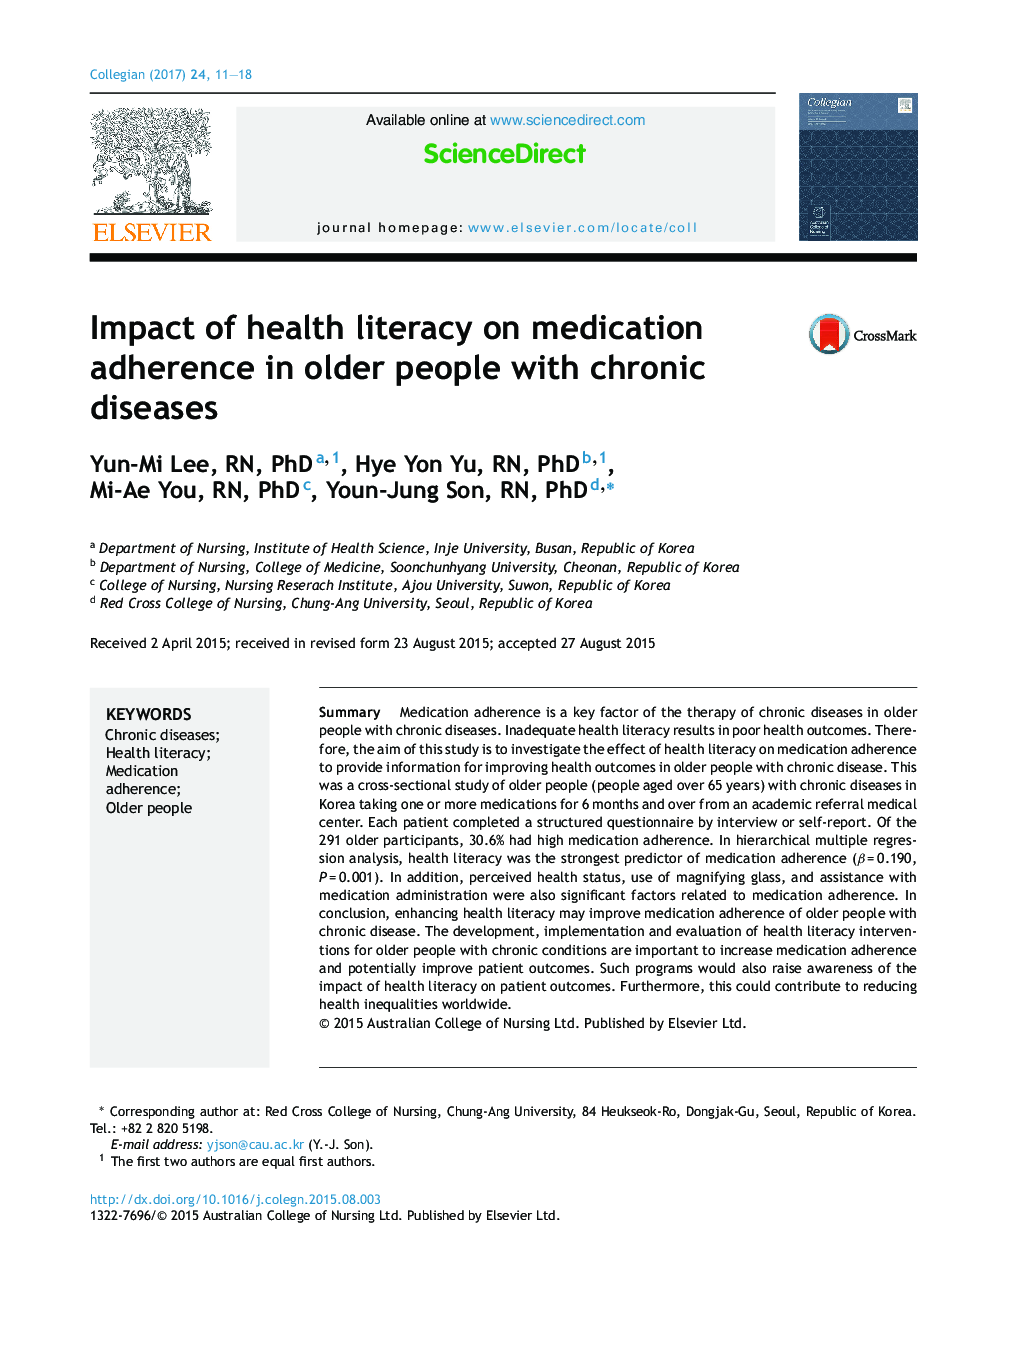 Impact of health literacy on medication adherence in older people with chronic diseases